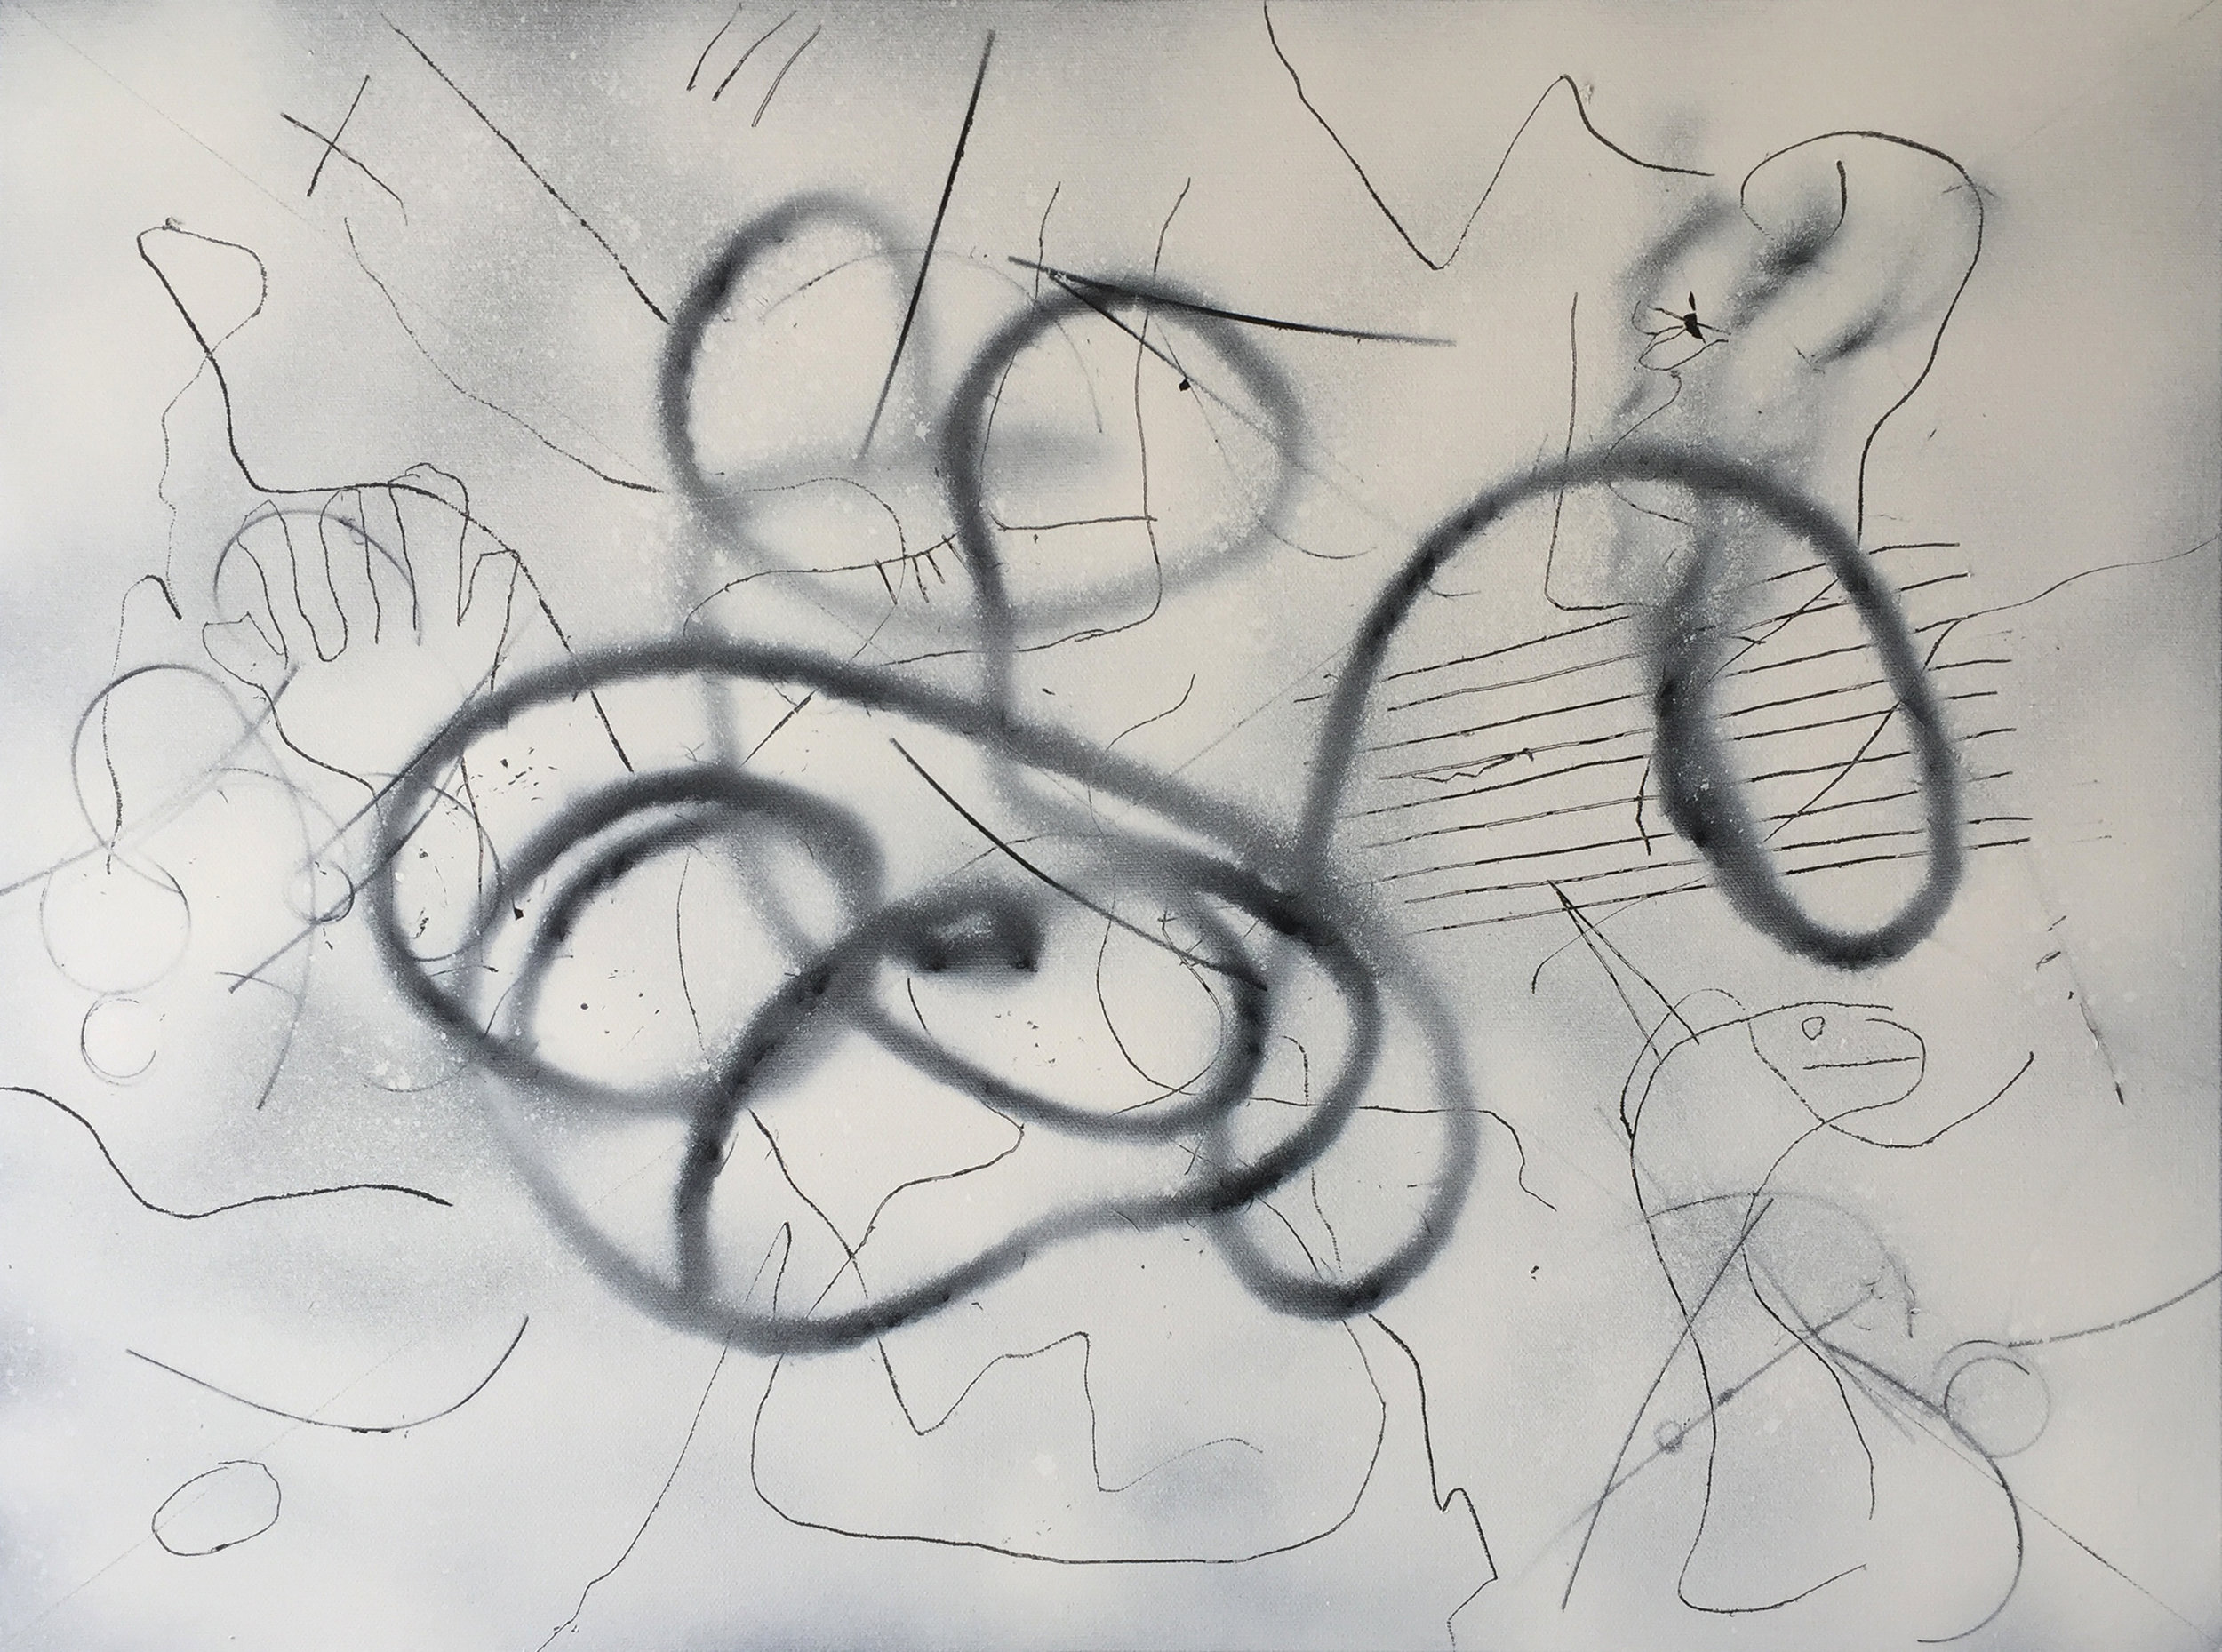  Arrangement with Paint and Rope #1, (2018), 18 x 24 in, Mixed on canvas 